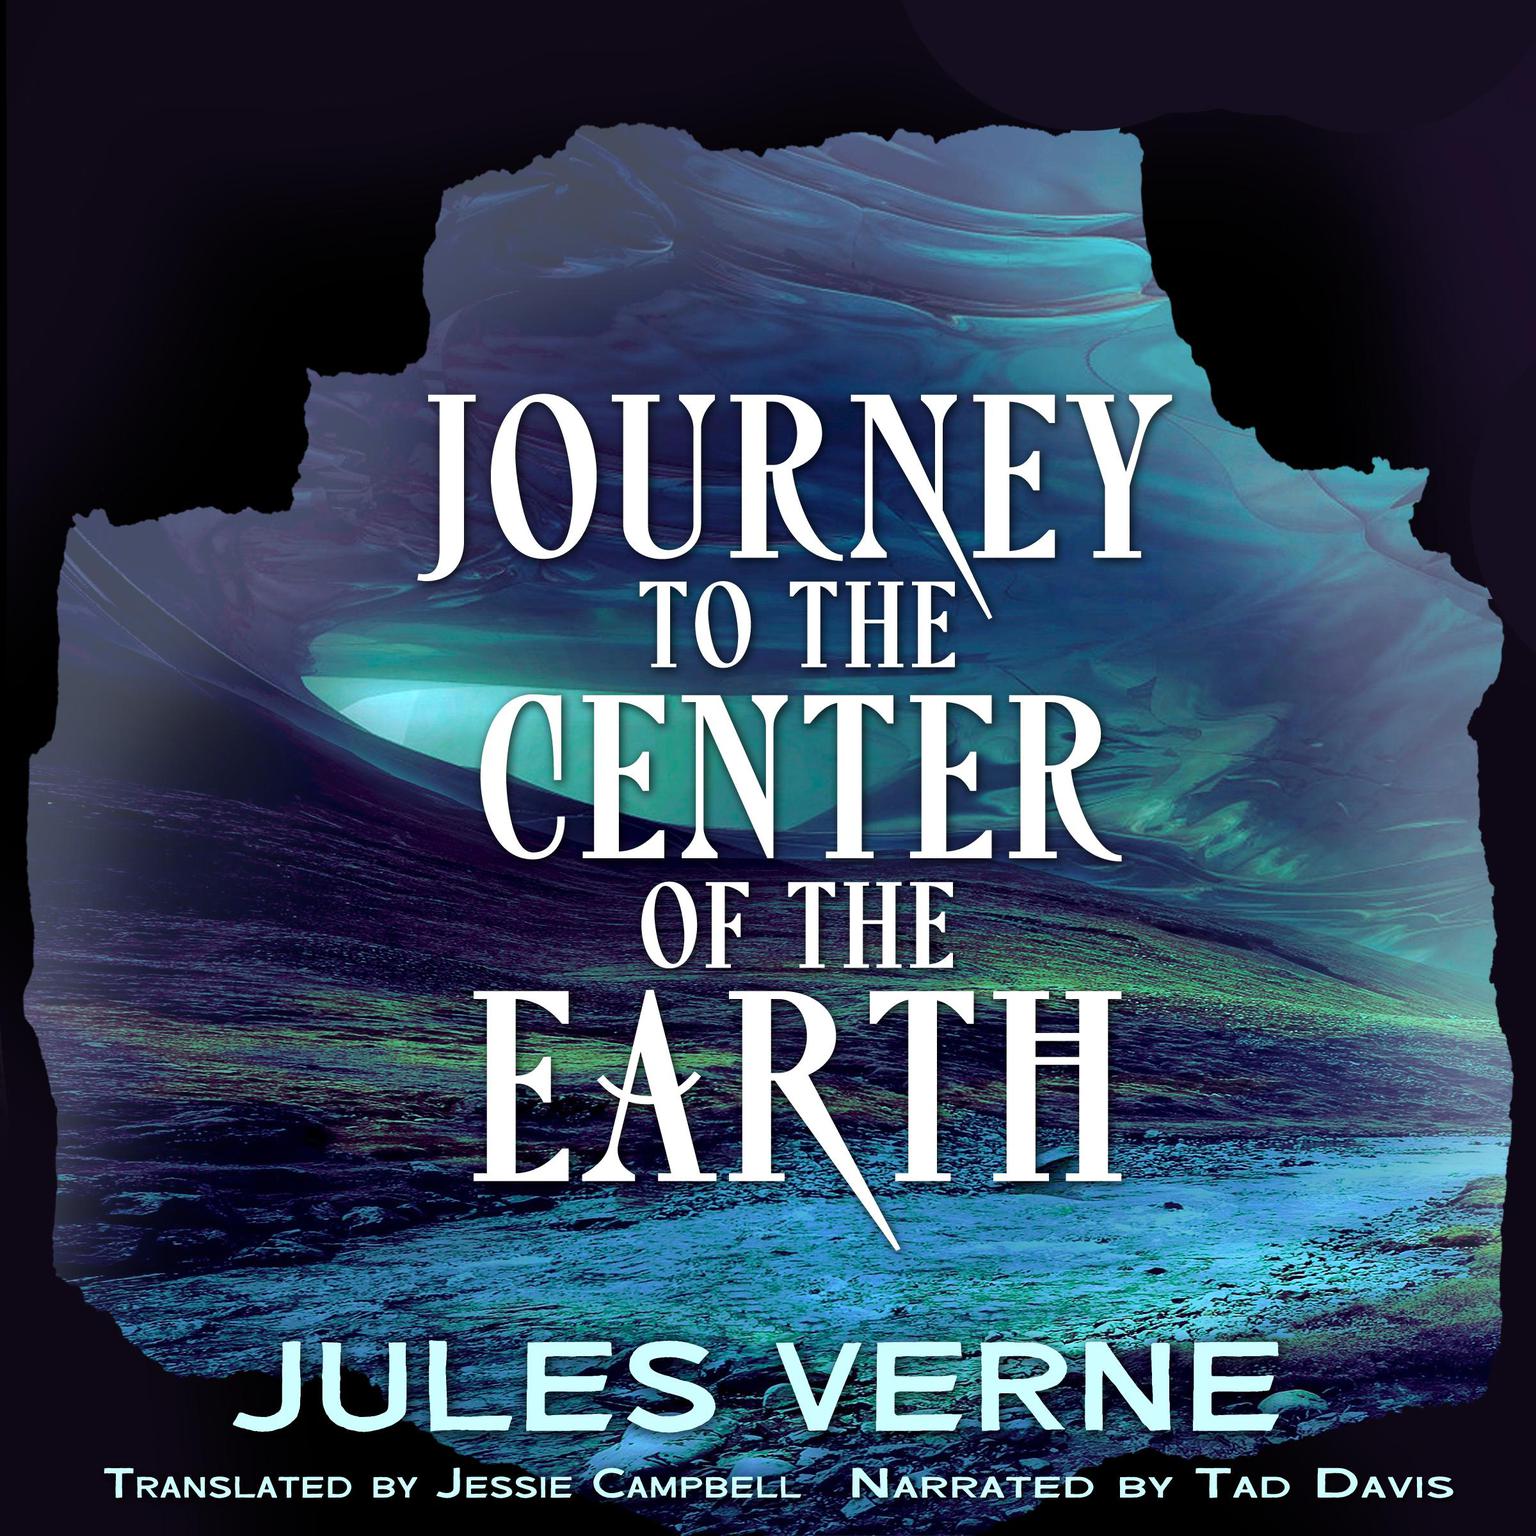 Journey to the Center of the Earth Audiobook, by Jules Verne